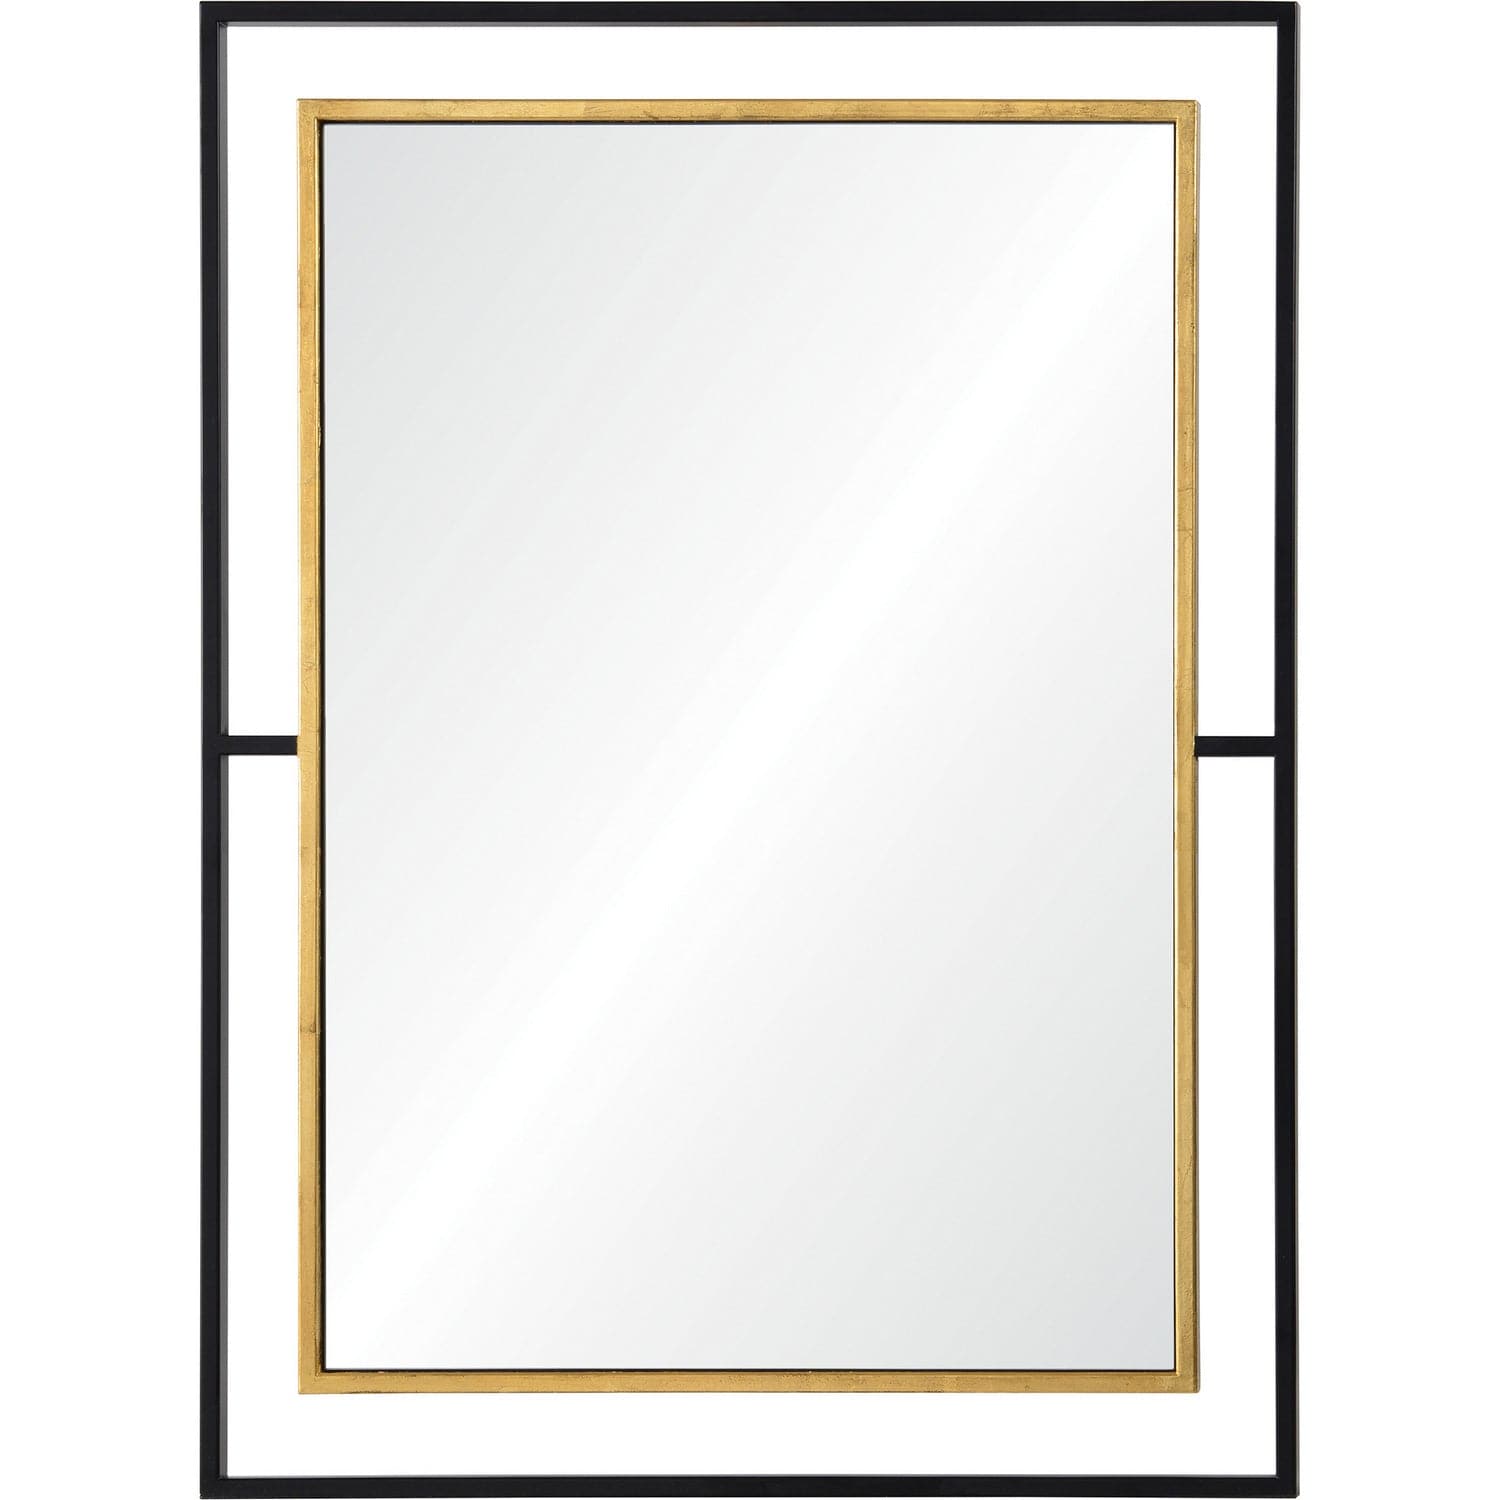 Renwil - MT2244 - Mirrors/Pictures - Mirrors-Rect./Sq.